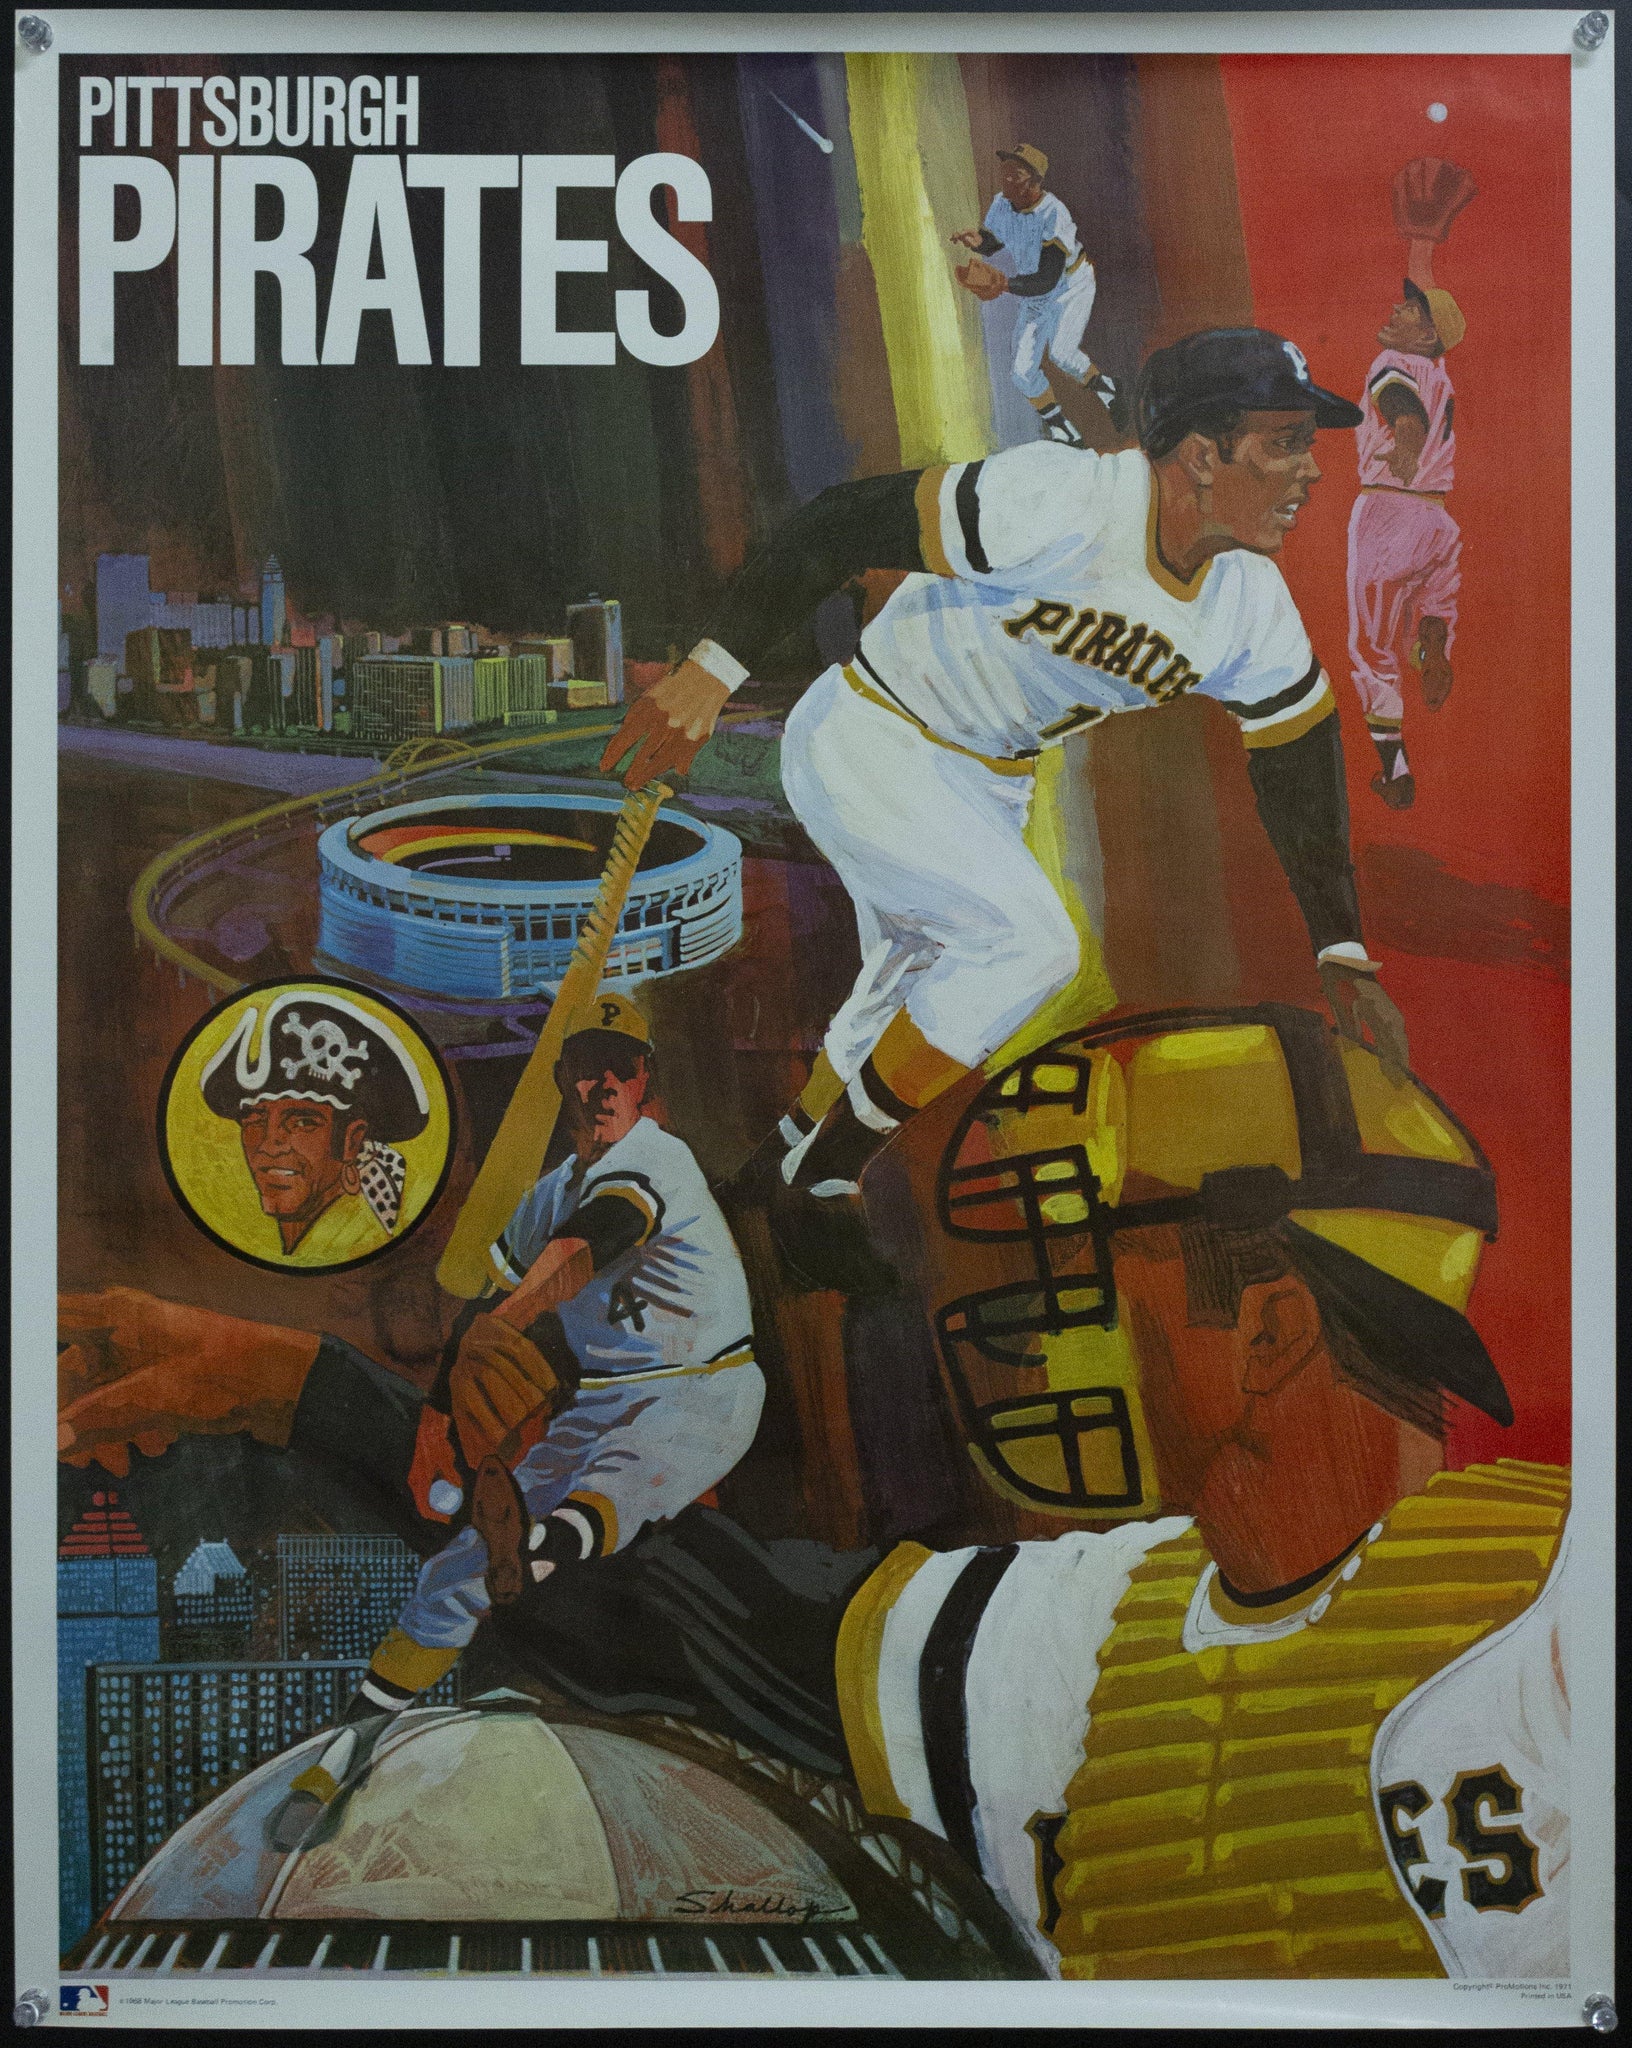 1971 Pittsburgh Pirates Major League Baseball MLB Shallop 1968 Vintage Poster - Golden Age Posters